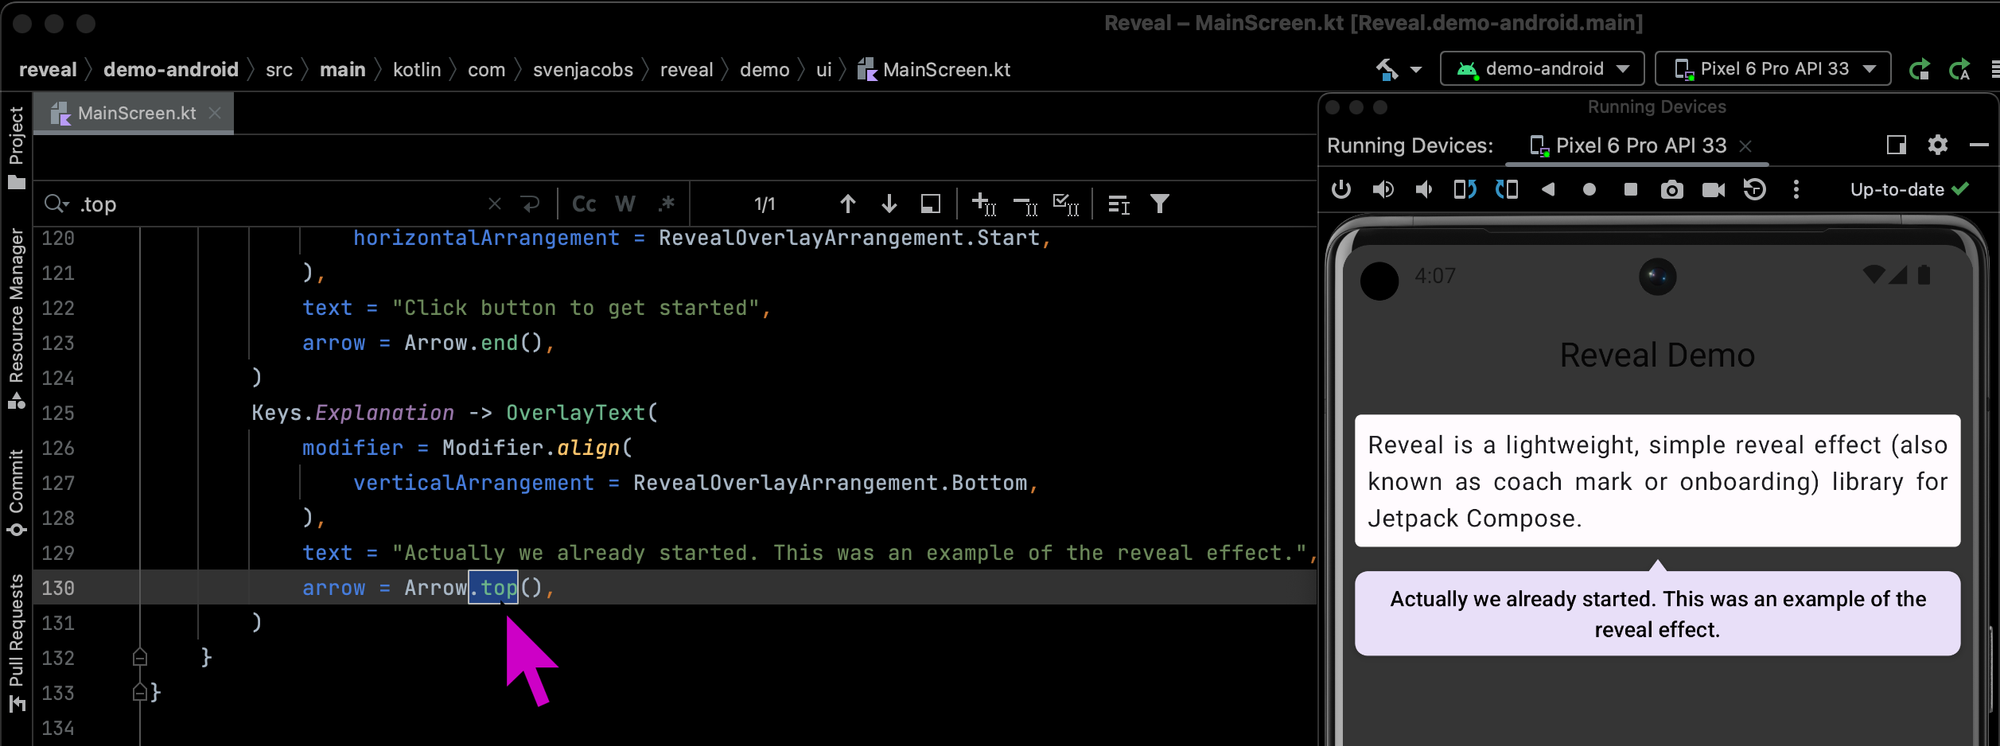 Reveal: A Jetpack Compose Library for Engaging Reveal Effects